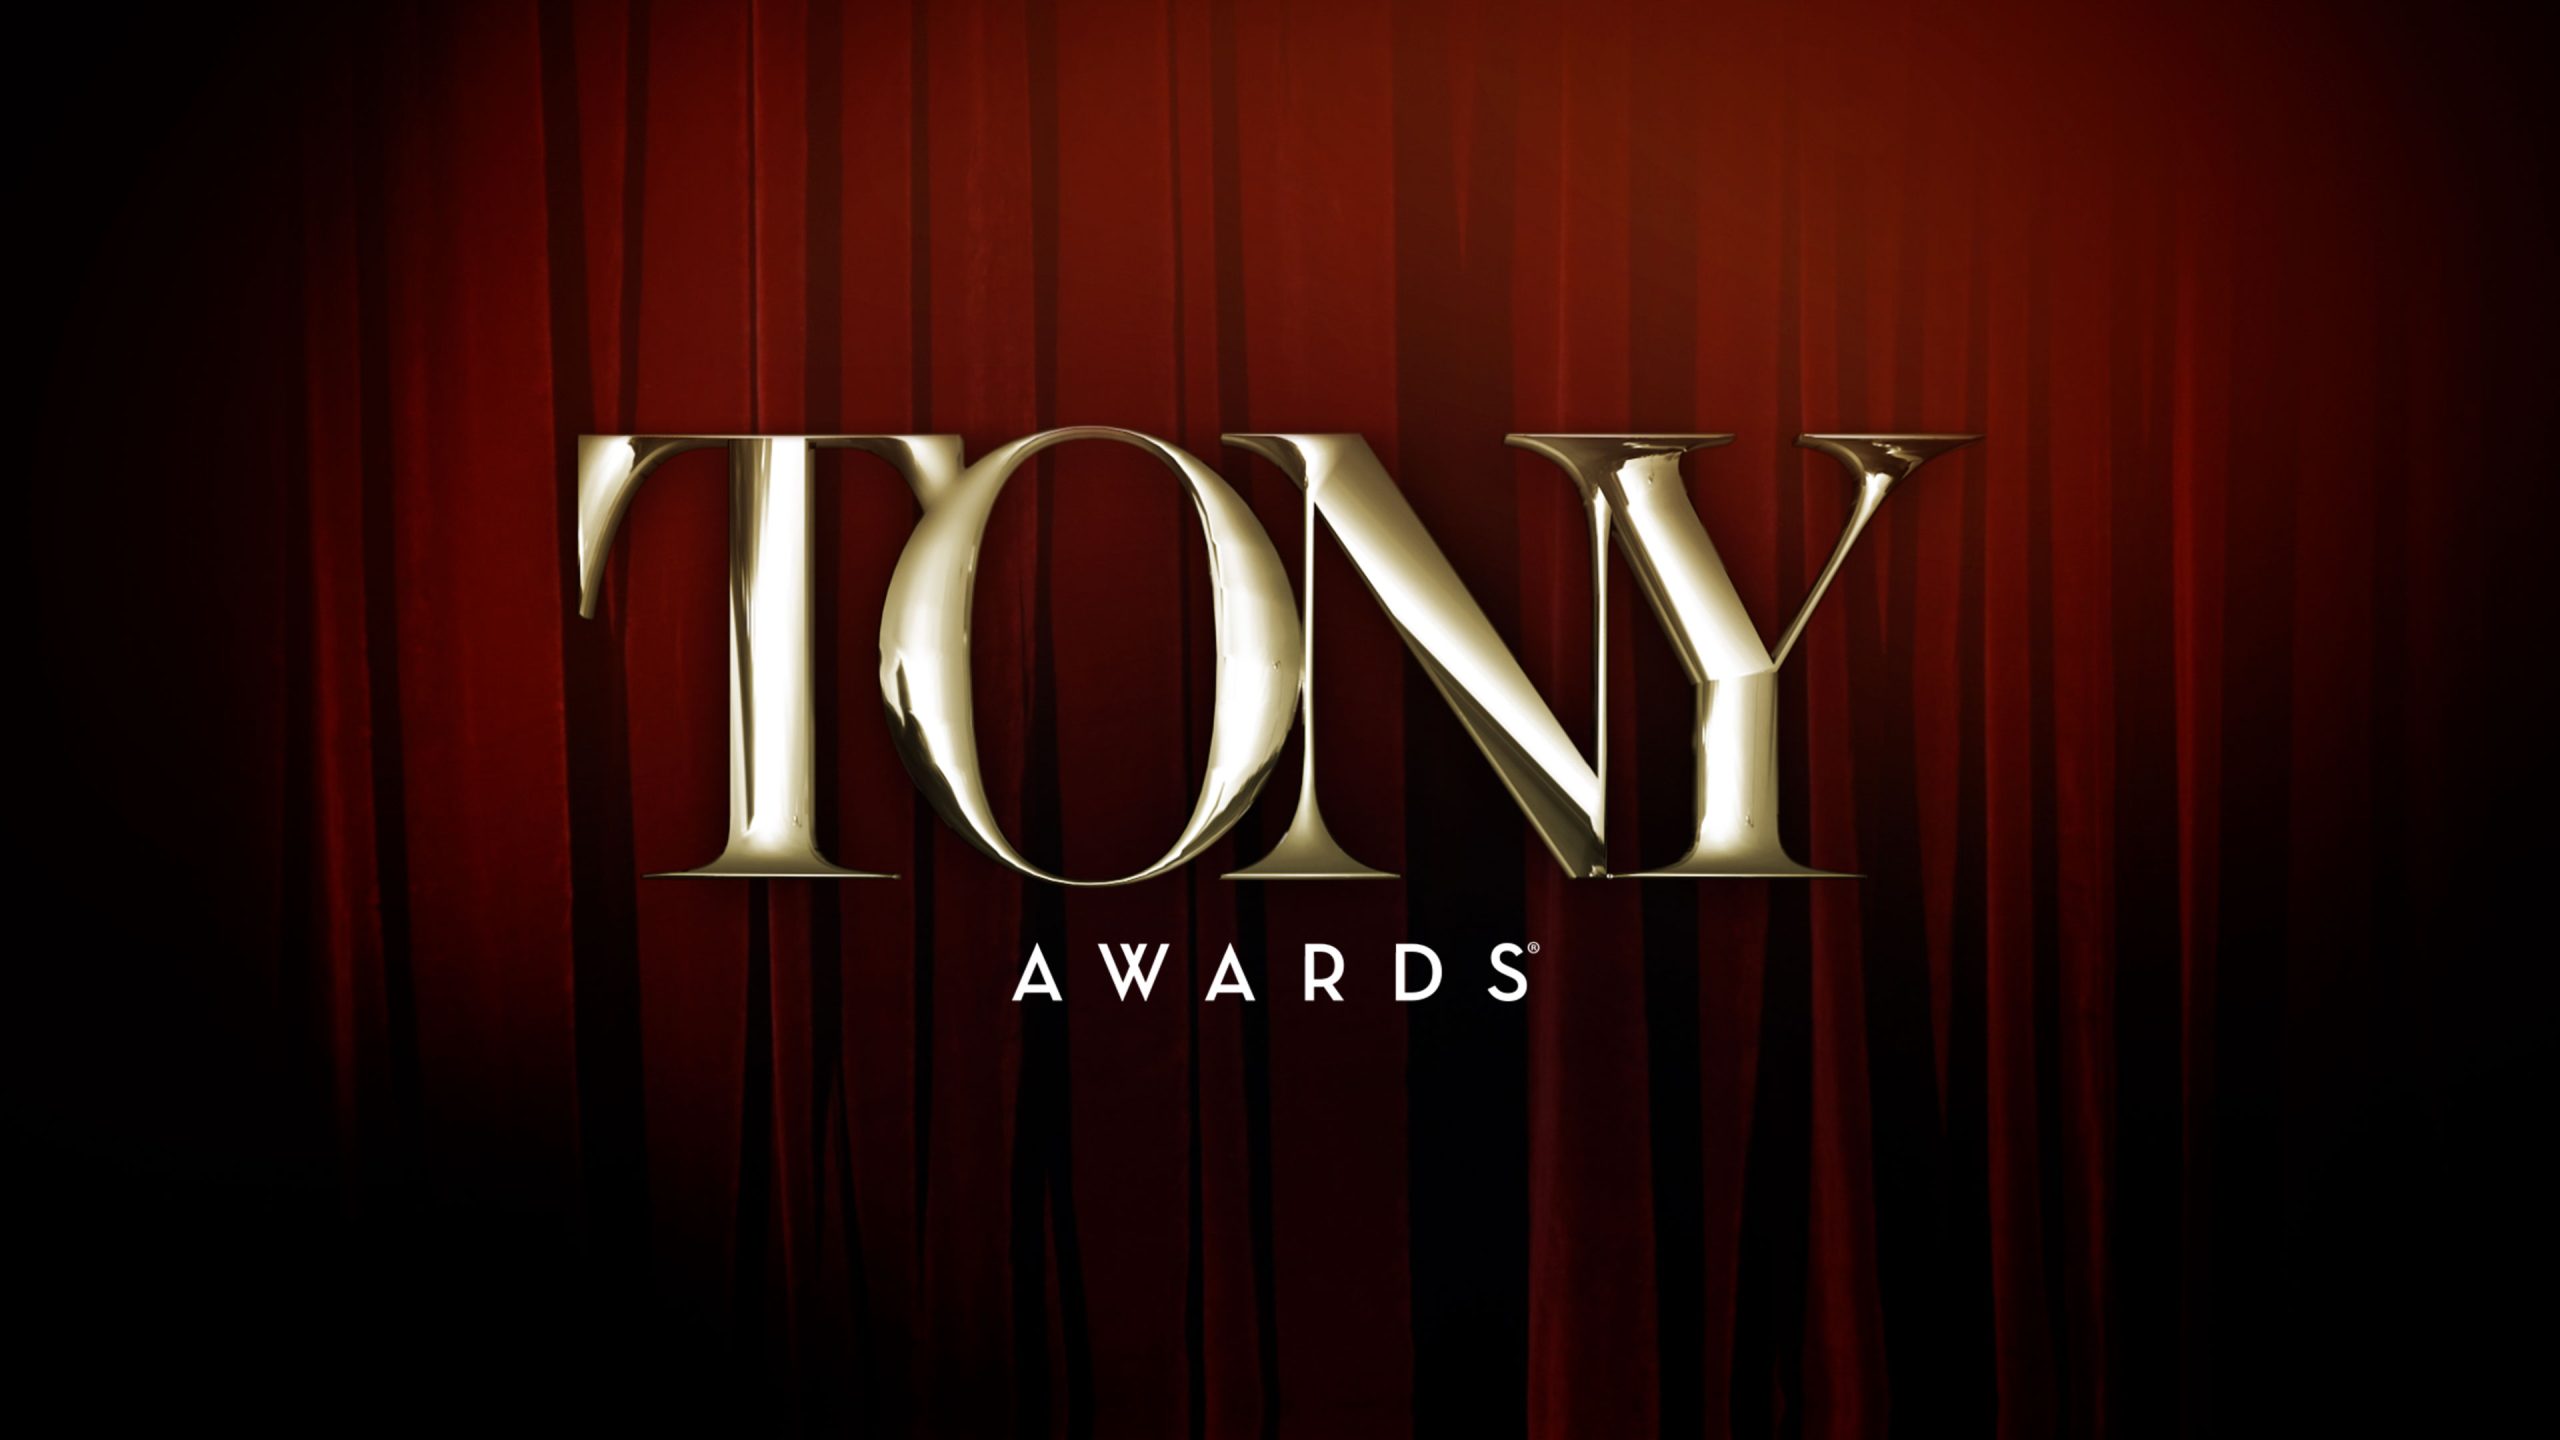 Watch the 2023 TONY Awards Live on Hulu What to Stream on Hulu Guides